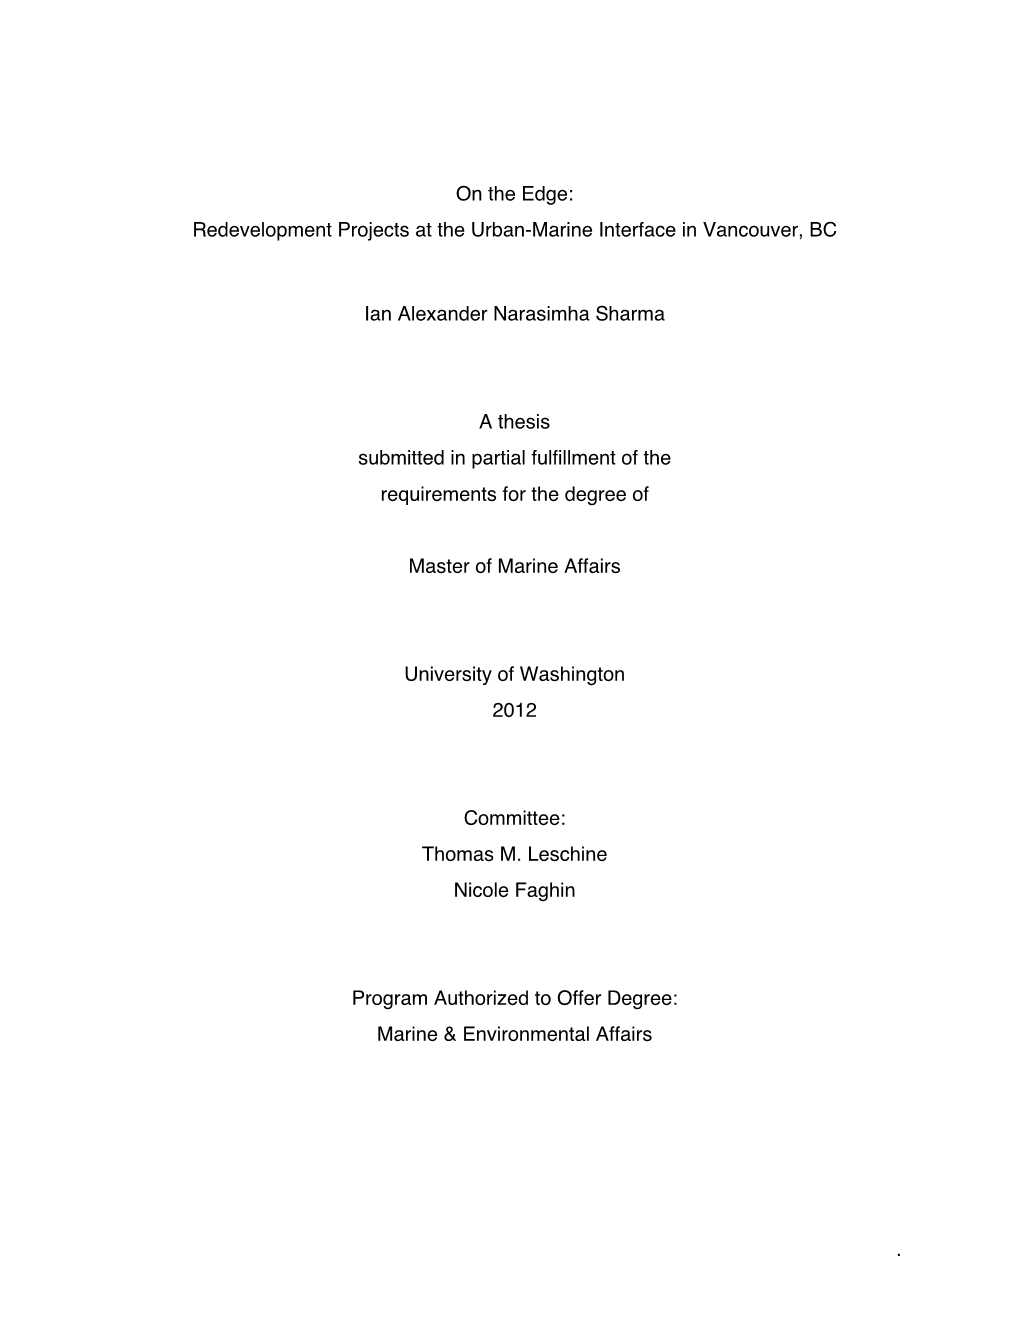 Thesis Submitted in Partial Fulfillment of the Requirements for the Degree Of